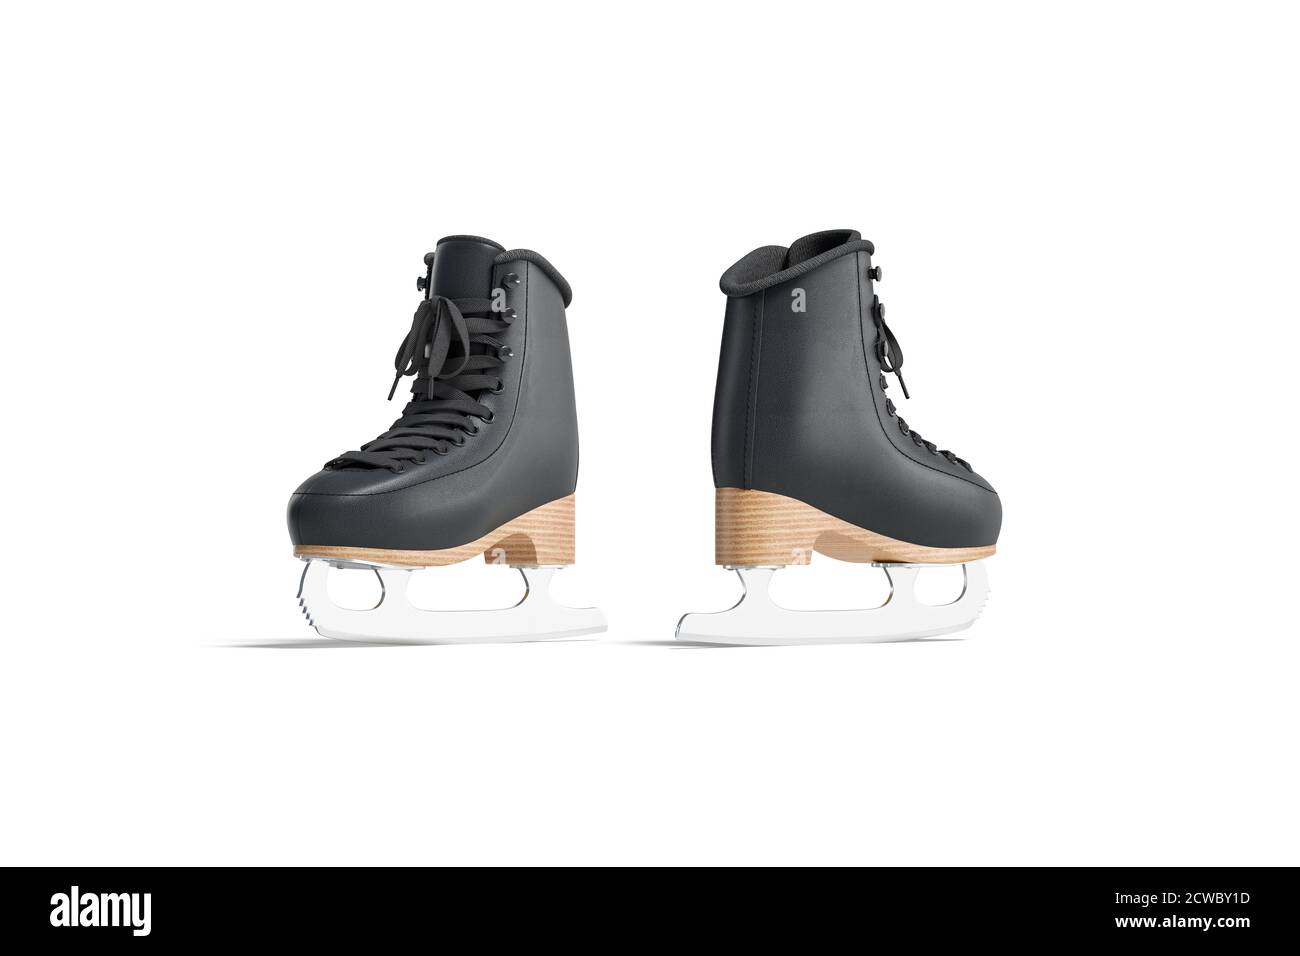 Blank black ice skates mockup, front and back view Stock Photo